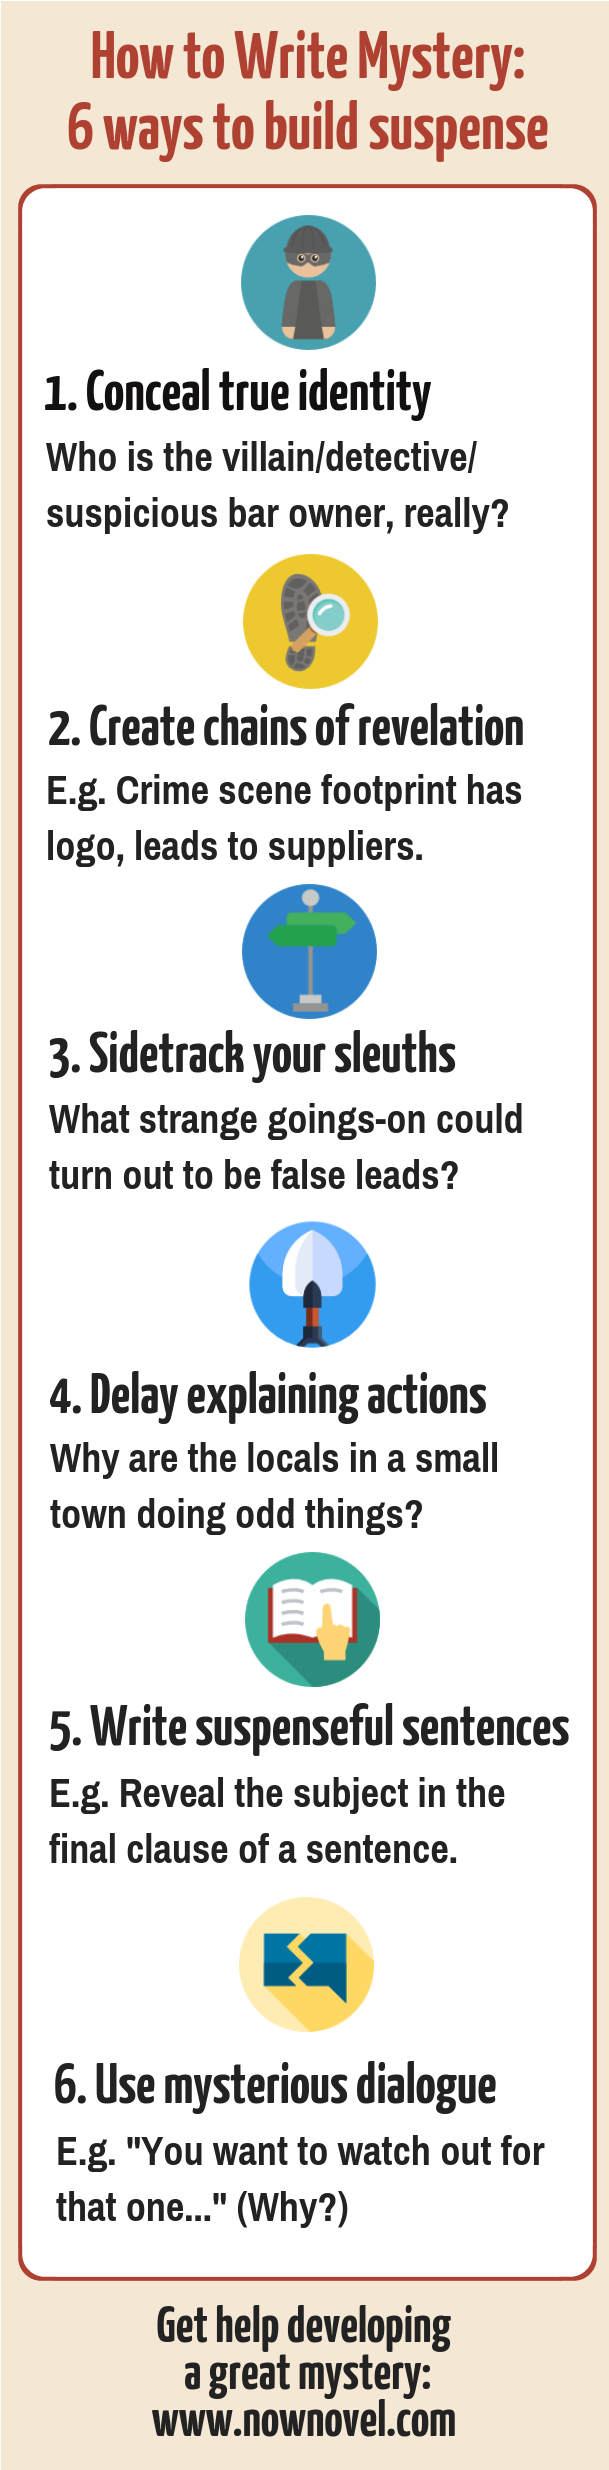 How to write mystery - 6 ways to create suspense - infographic | Now Novel